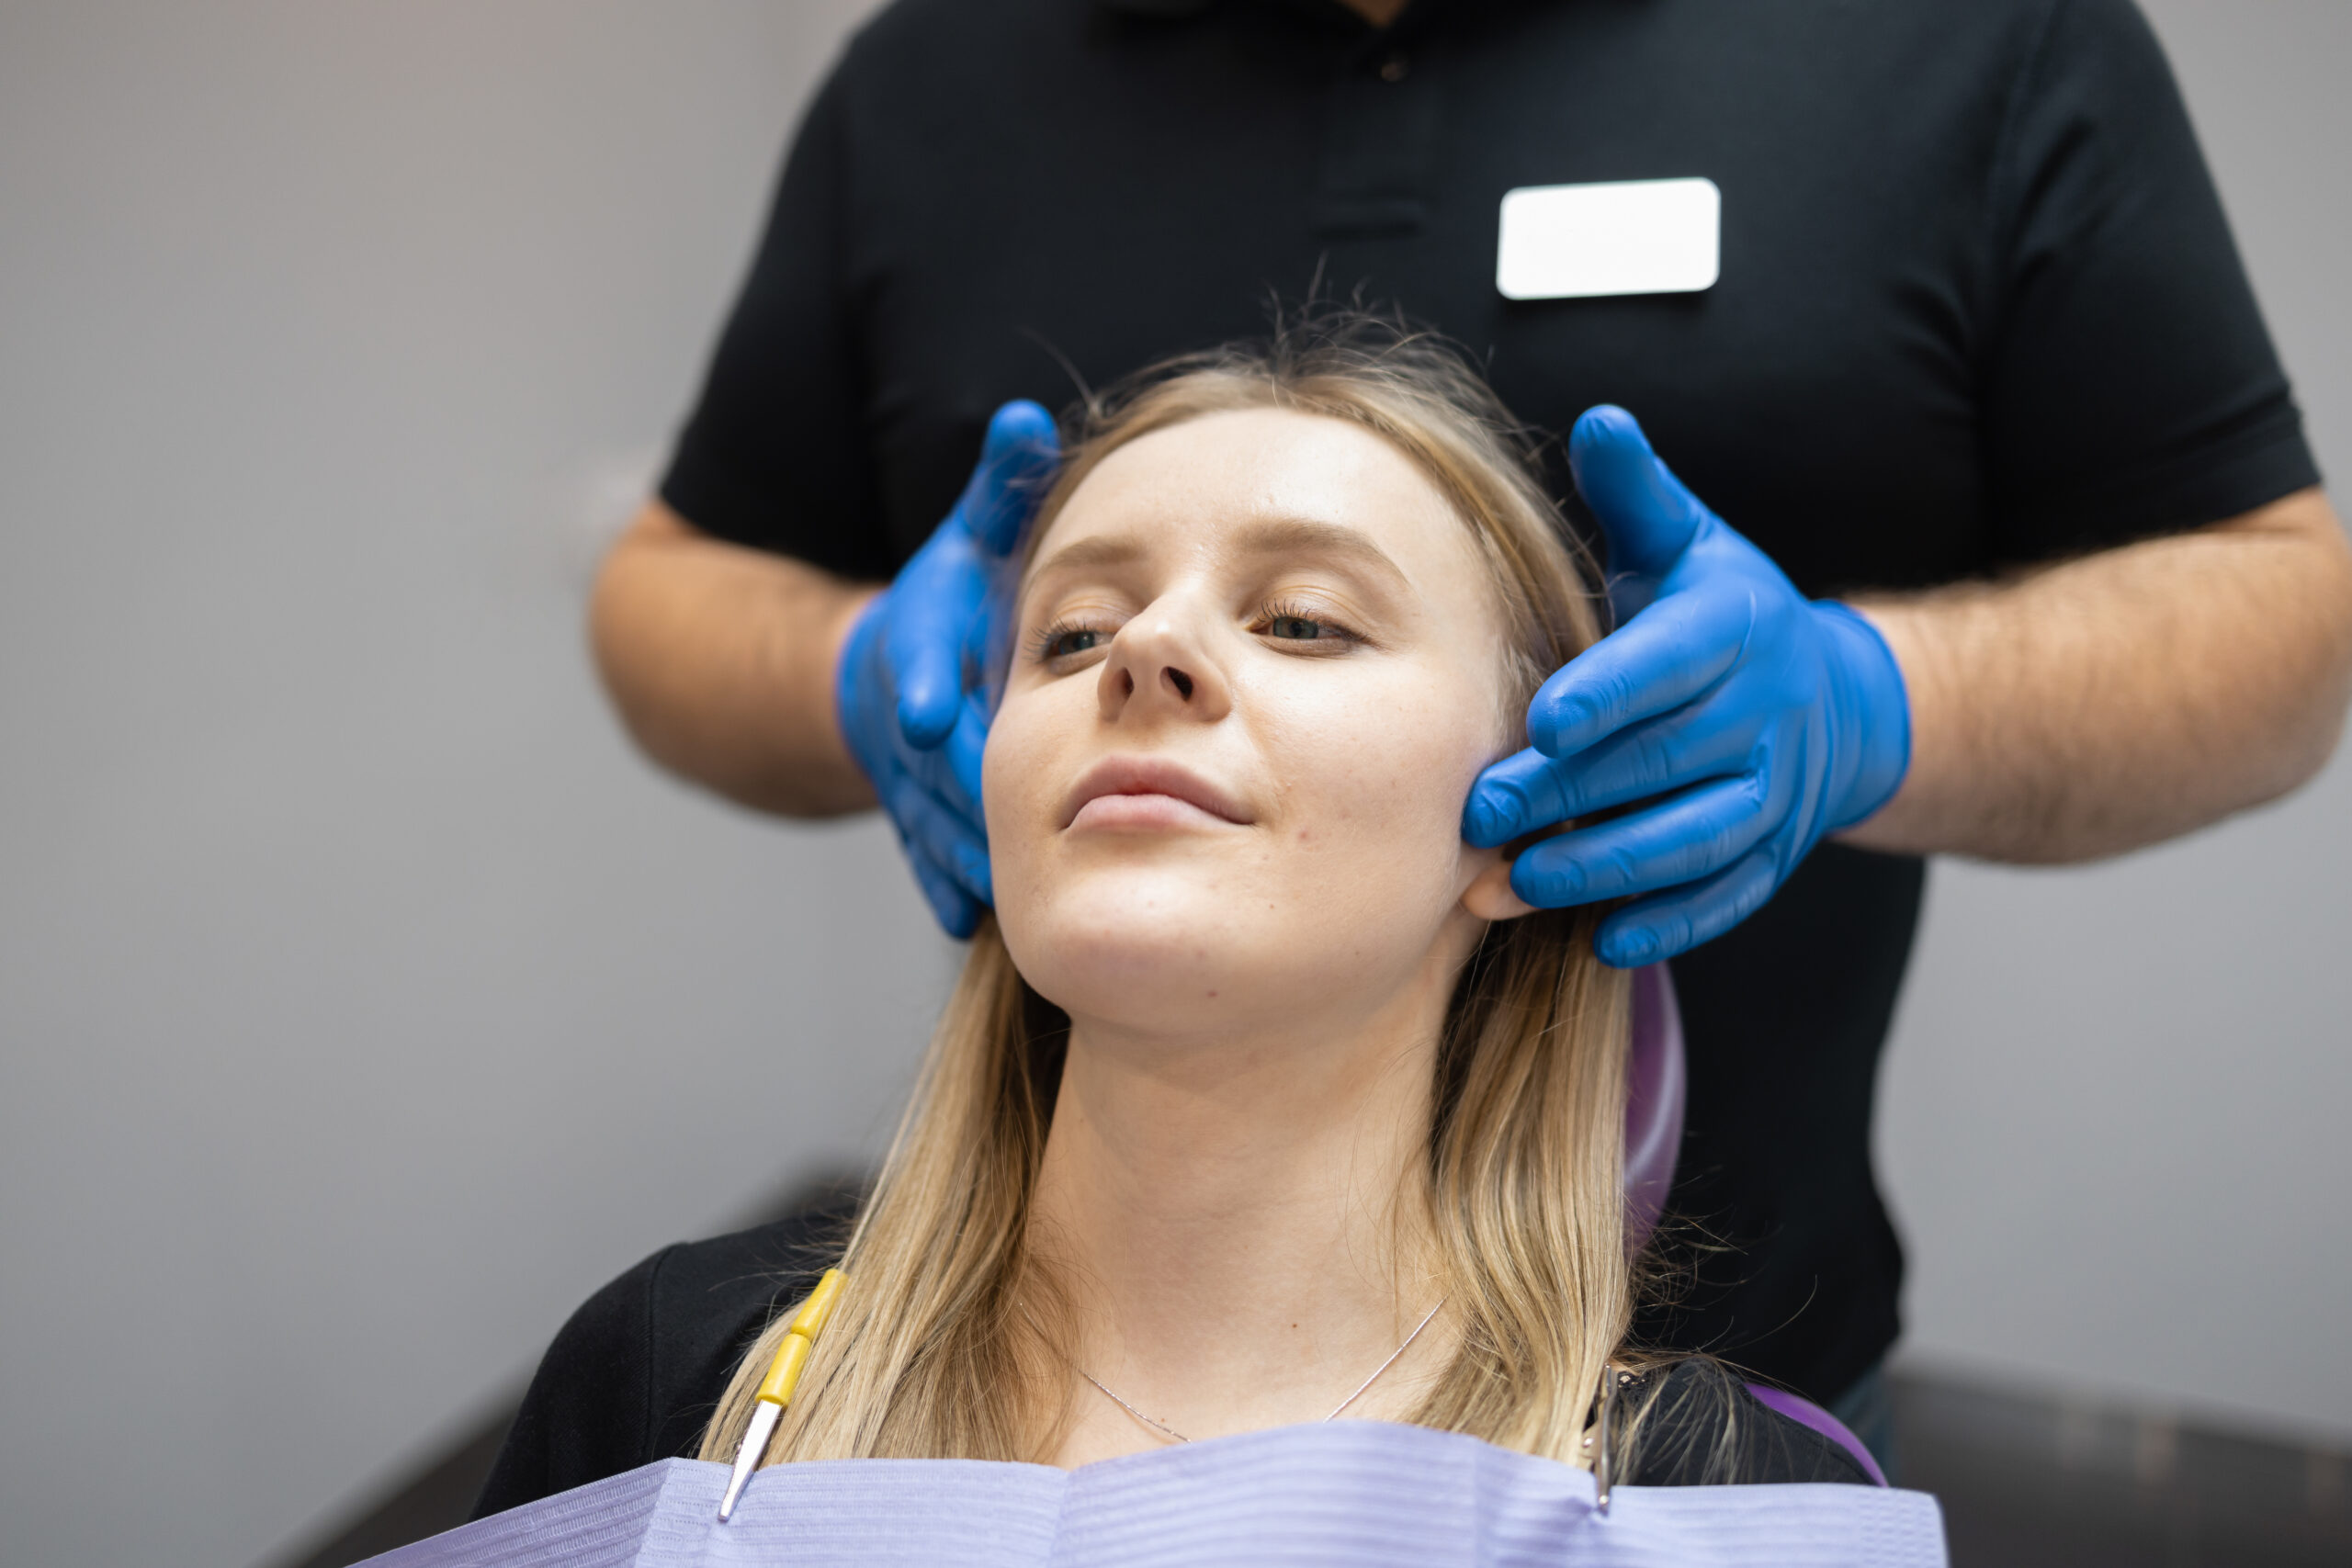 A woman patient getting ready for her oral surgery procedure